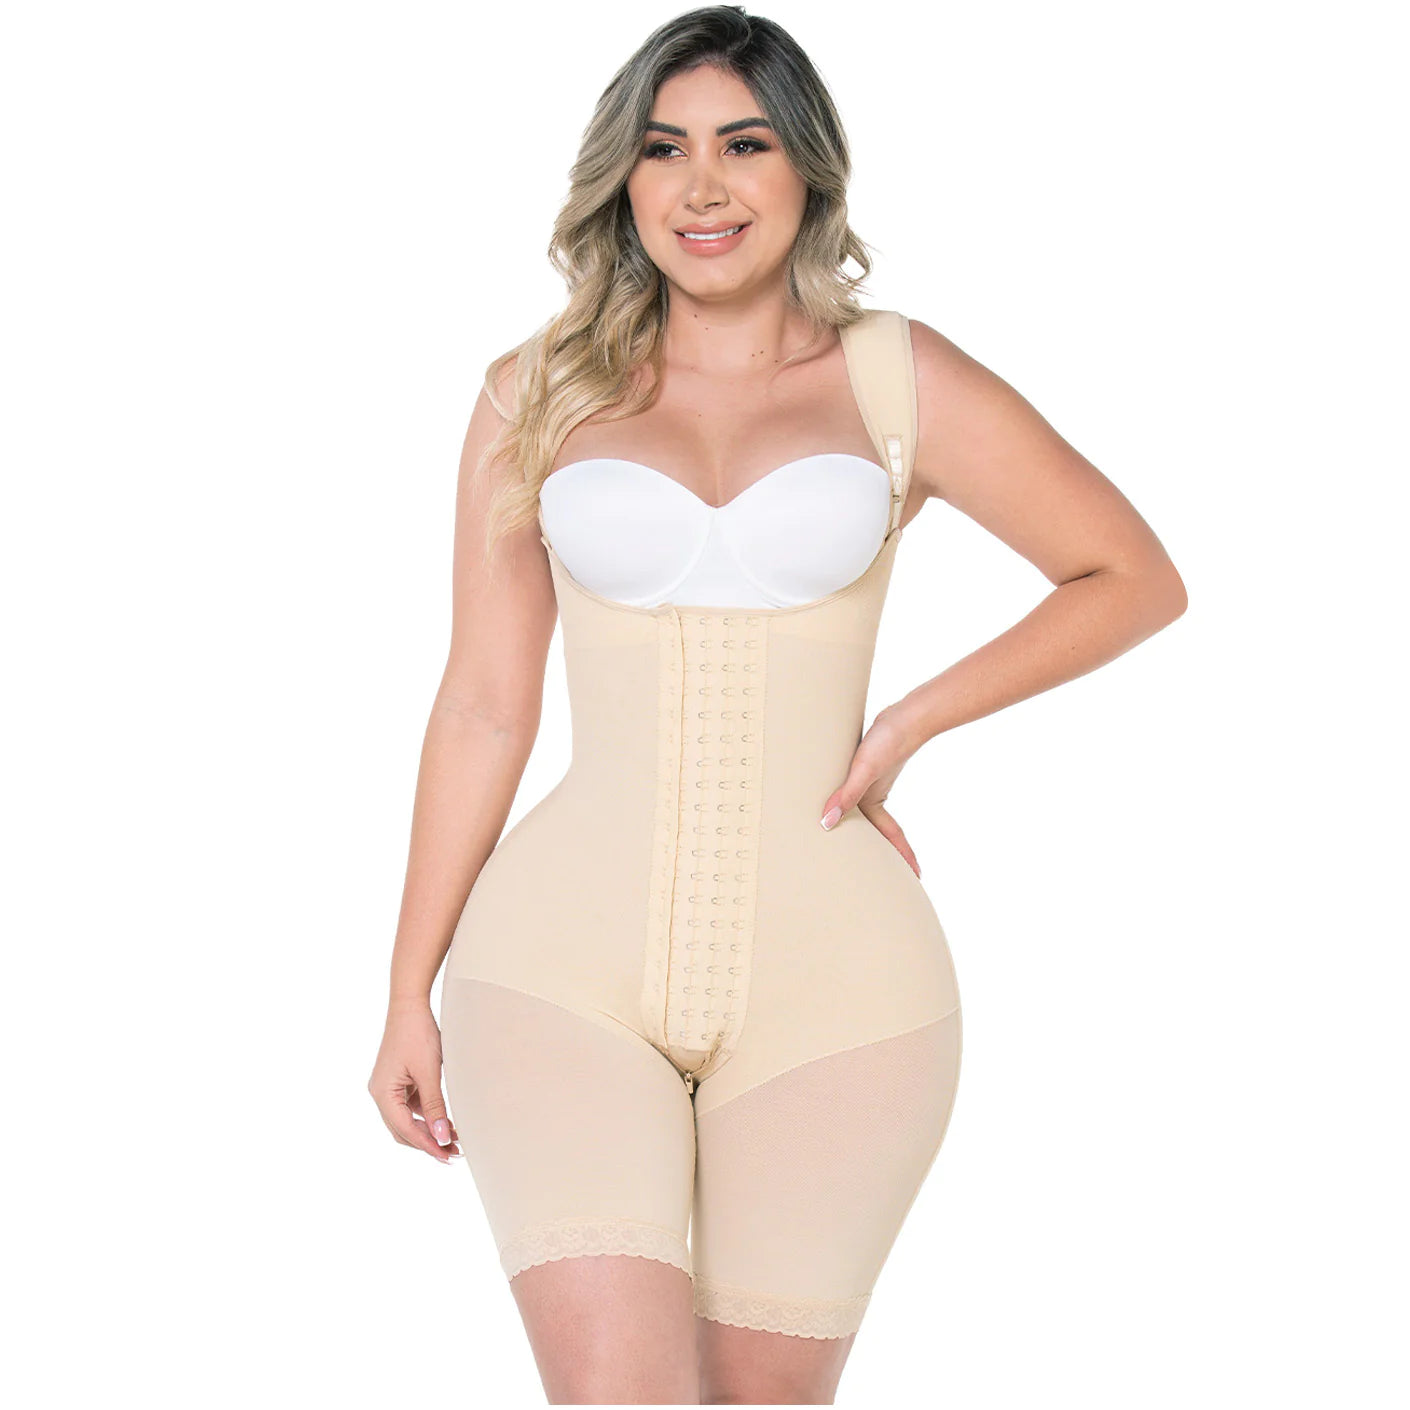 Fajas MYD 0489 | Fajas Colombianas Post Surgery Mid Thigh Shapewear Bodysuit for Guitar and Hourglass Body Types